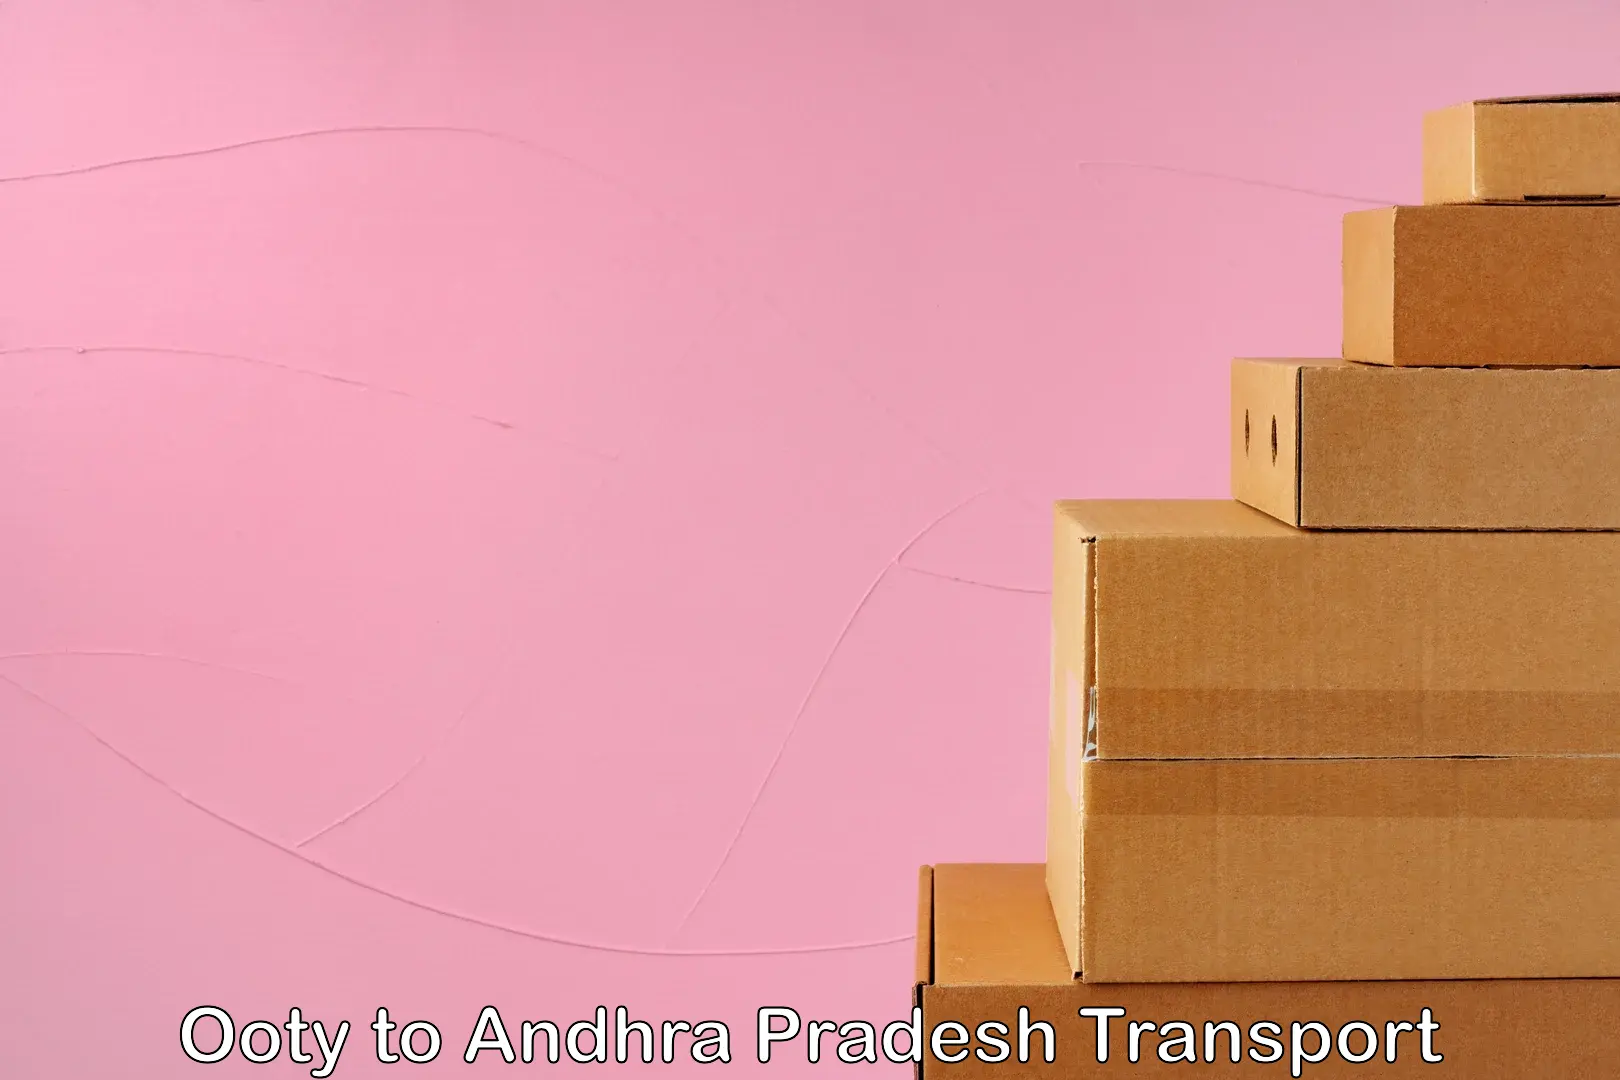 Truck transport companies in India Ooty to Buckinghampet